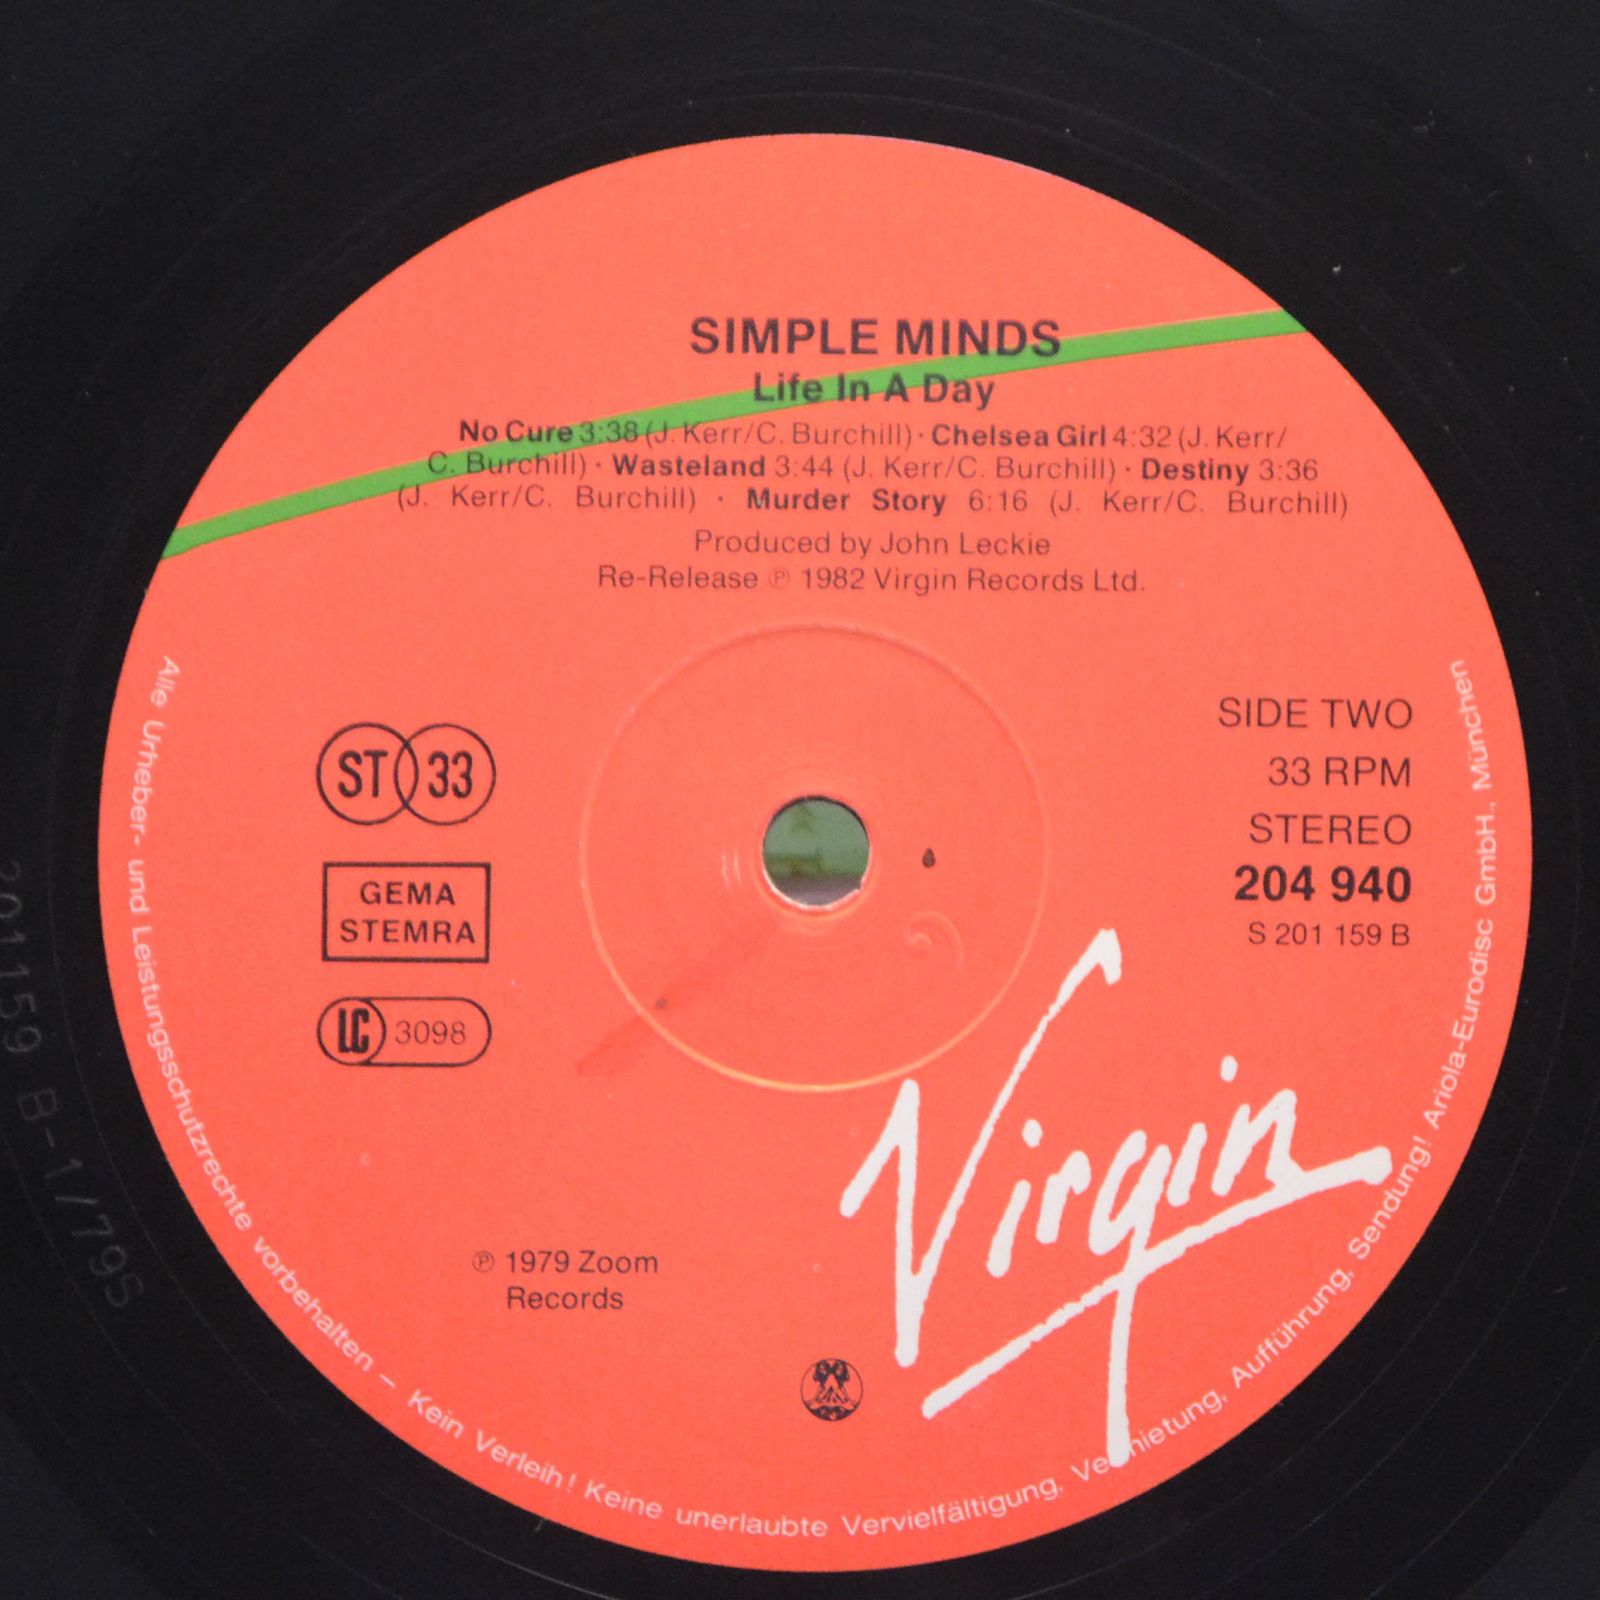 Simple Minds — Life In A Day, 1984